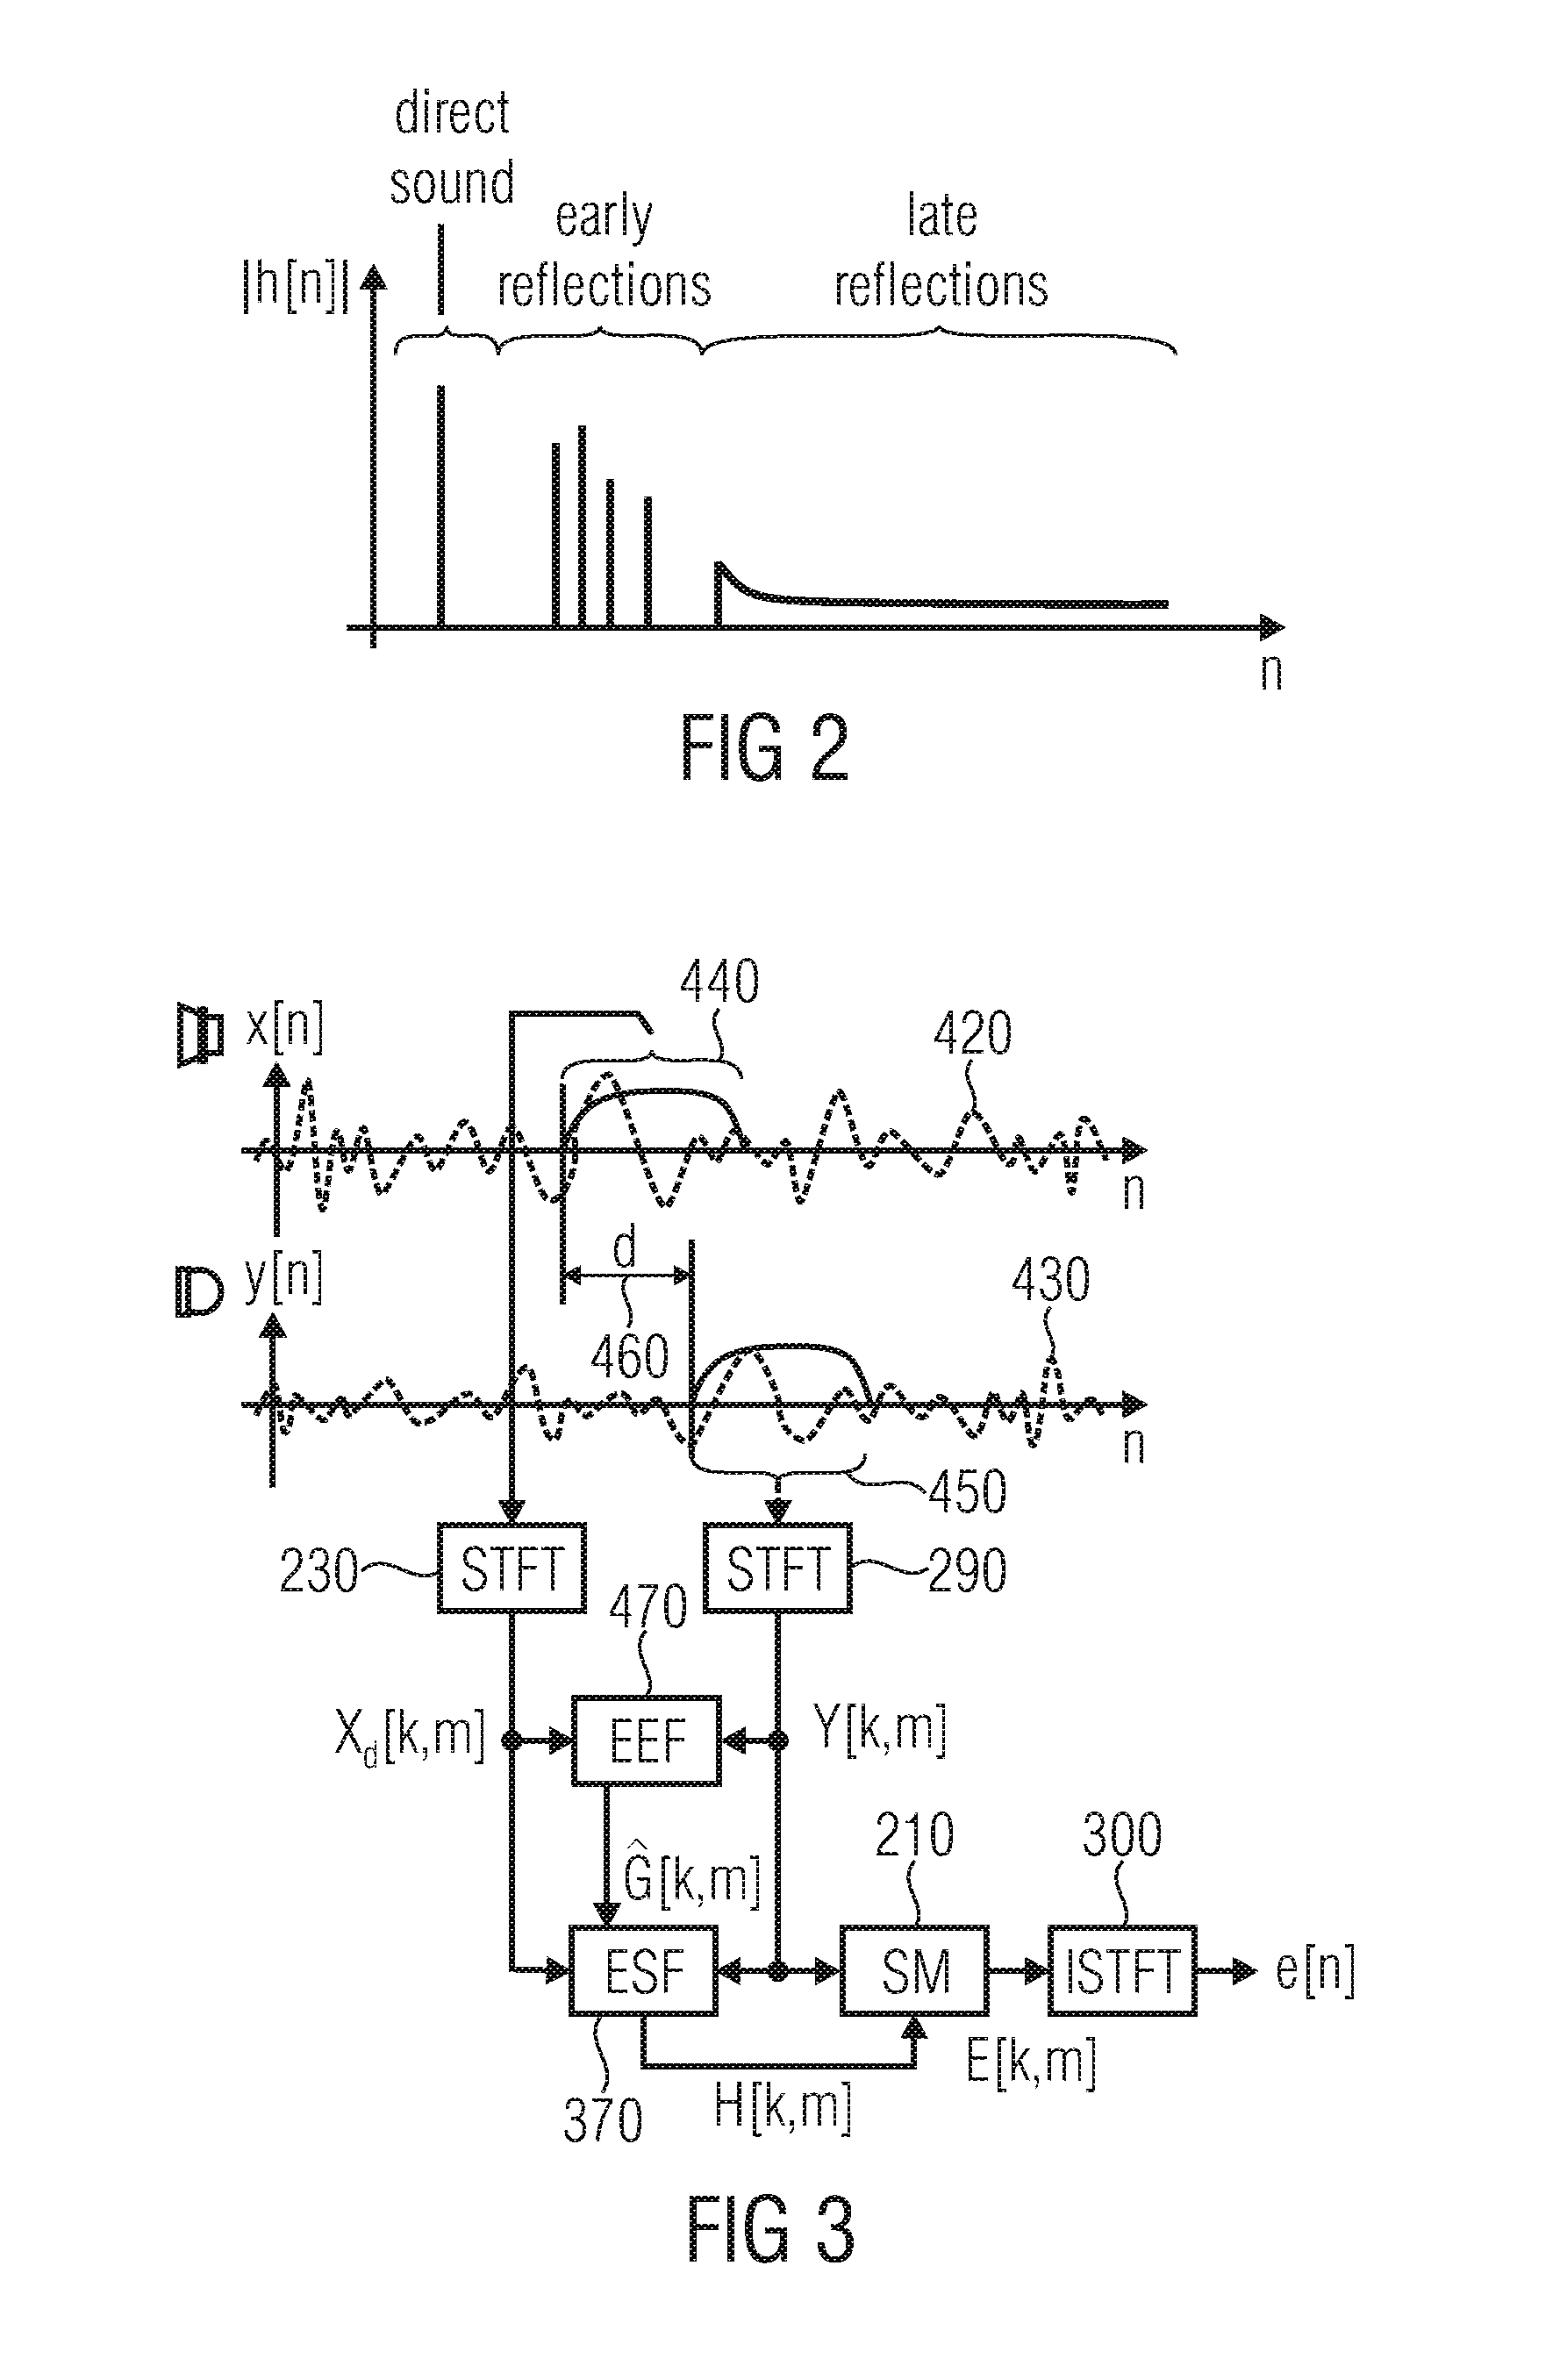 Echo suppression comprising modeling of late reverberation components